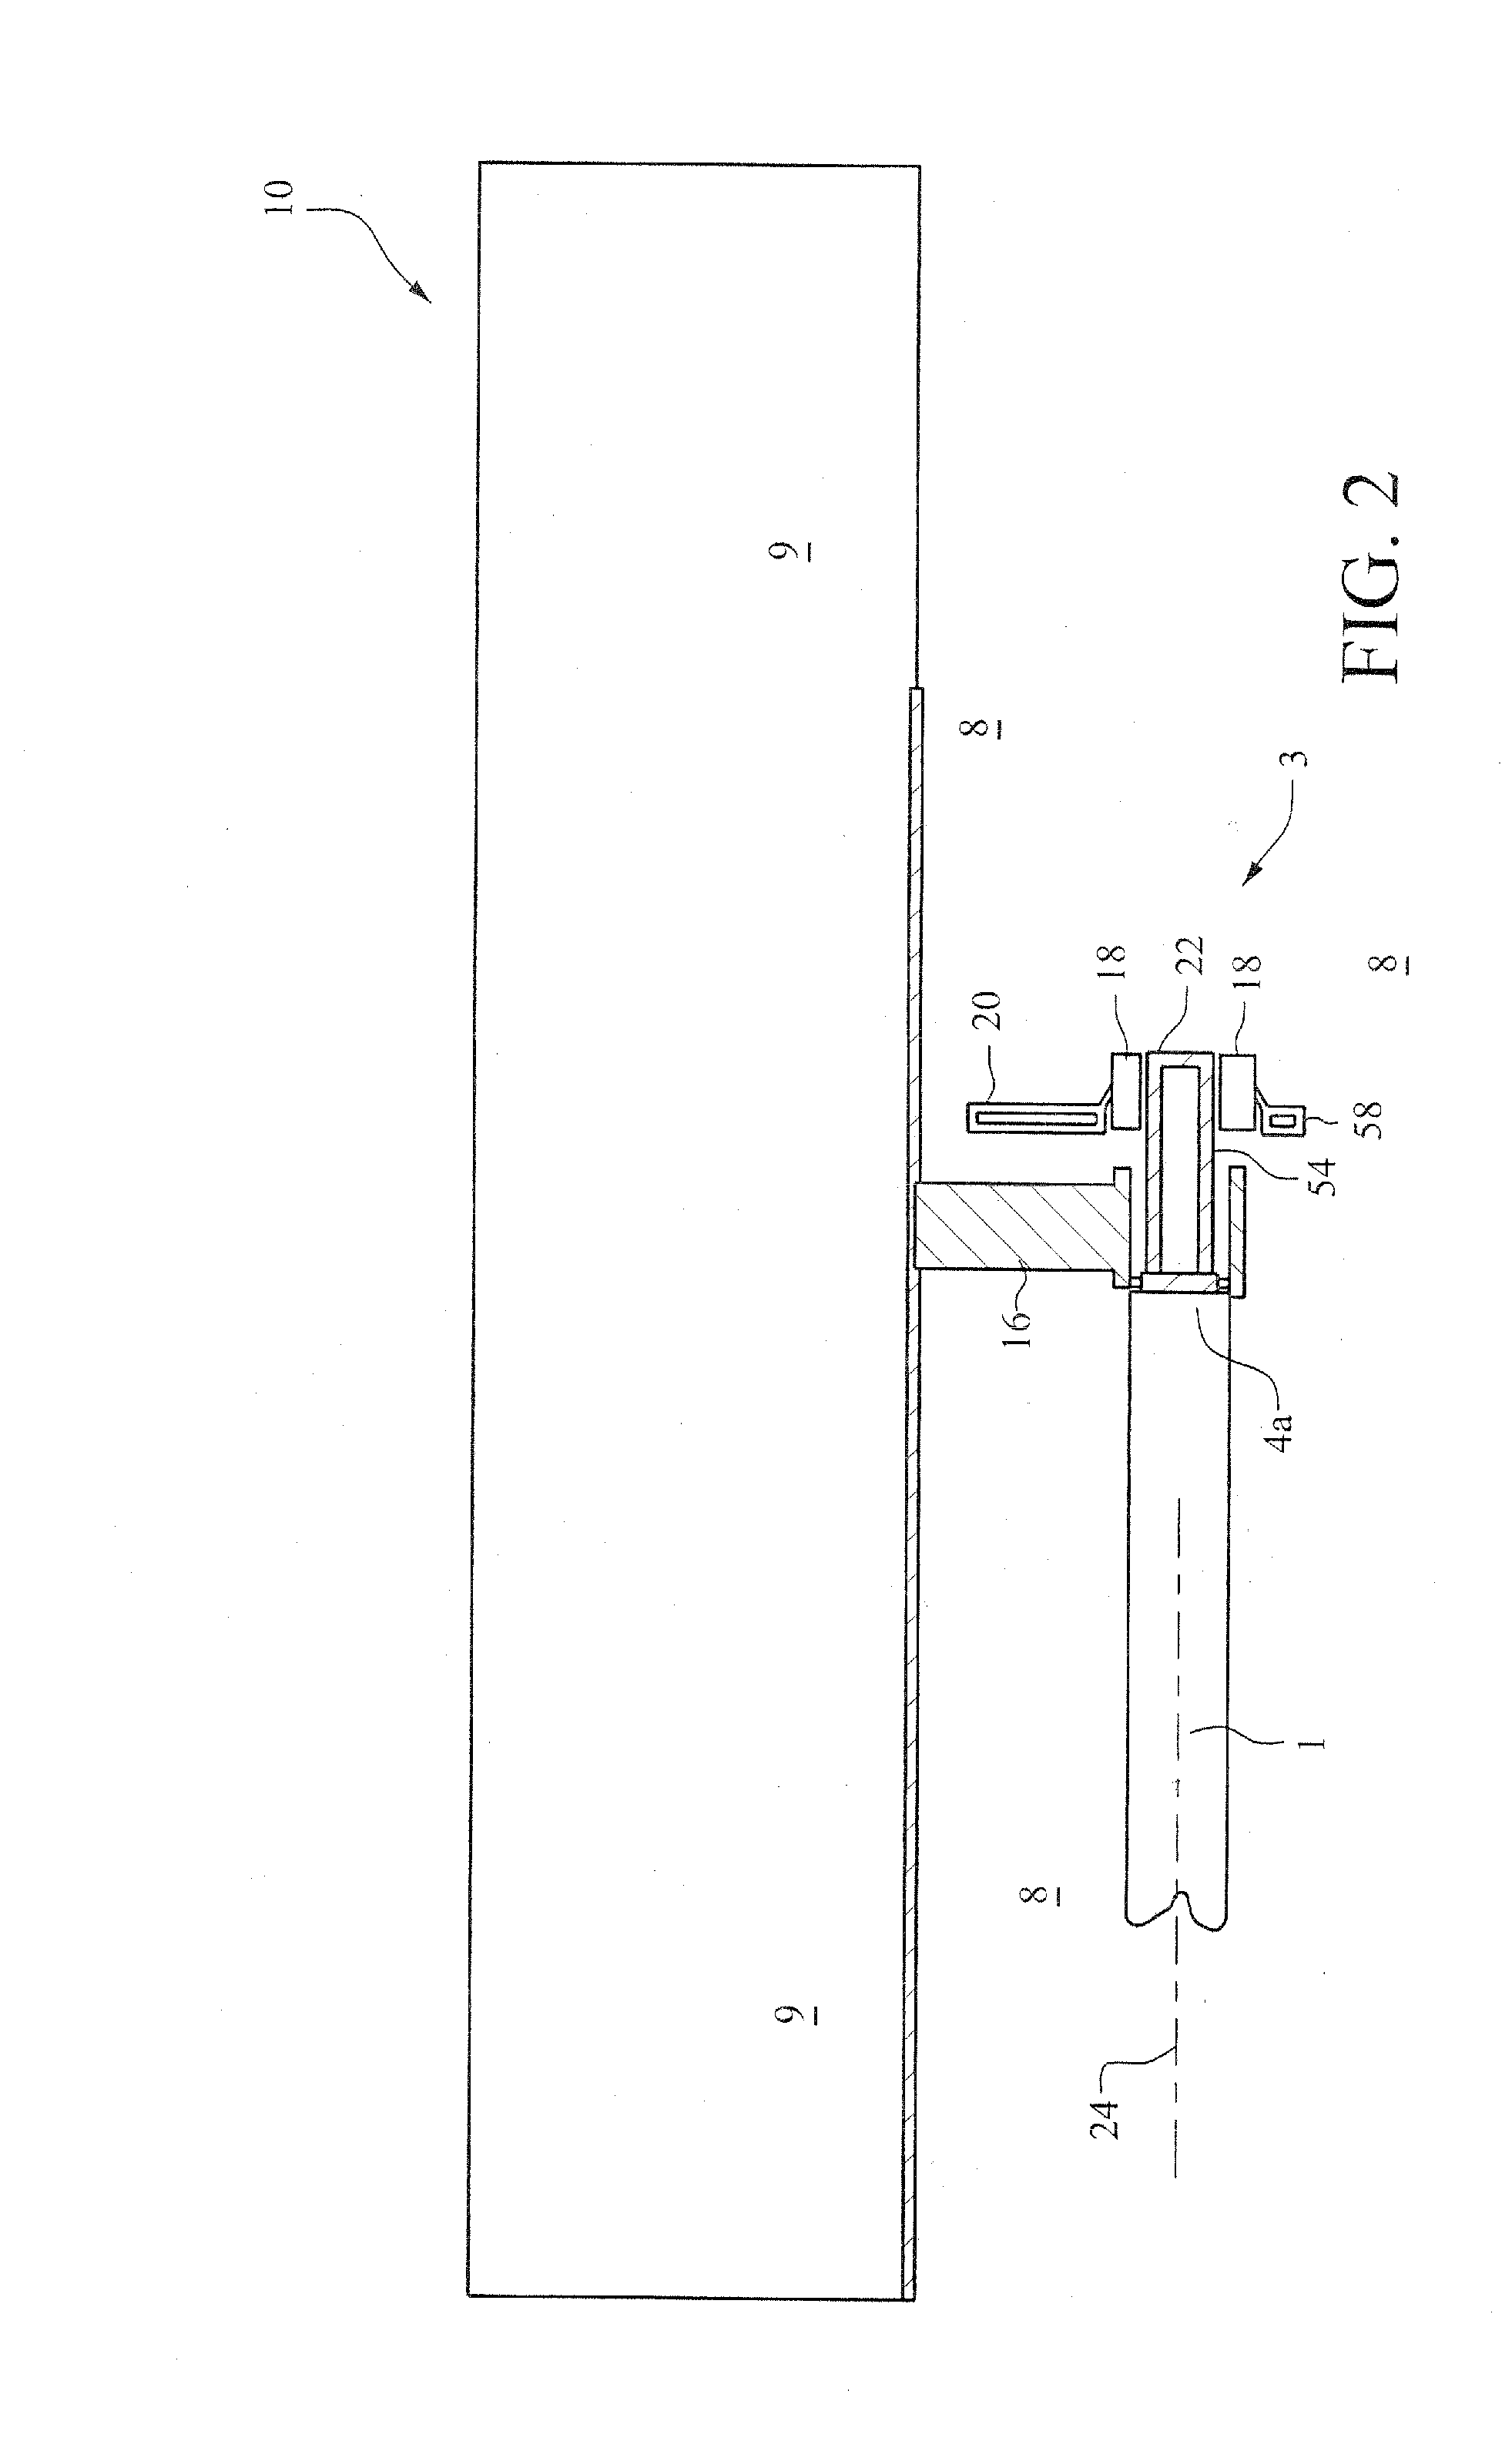 Endblock for rotatable target with electrical connection between collector and rotor at pressure less than atmospheric pressure